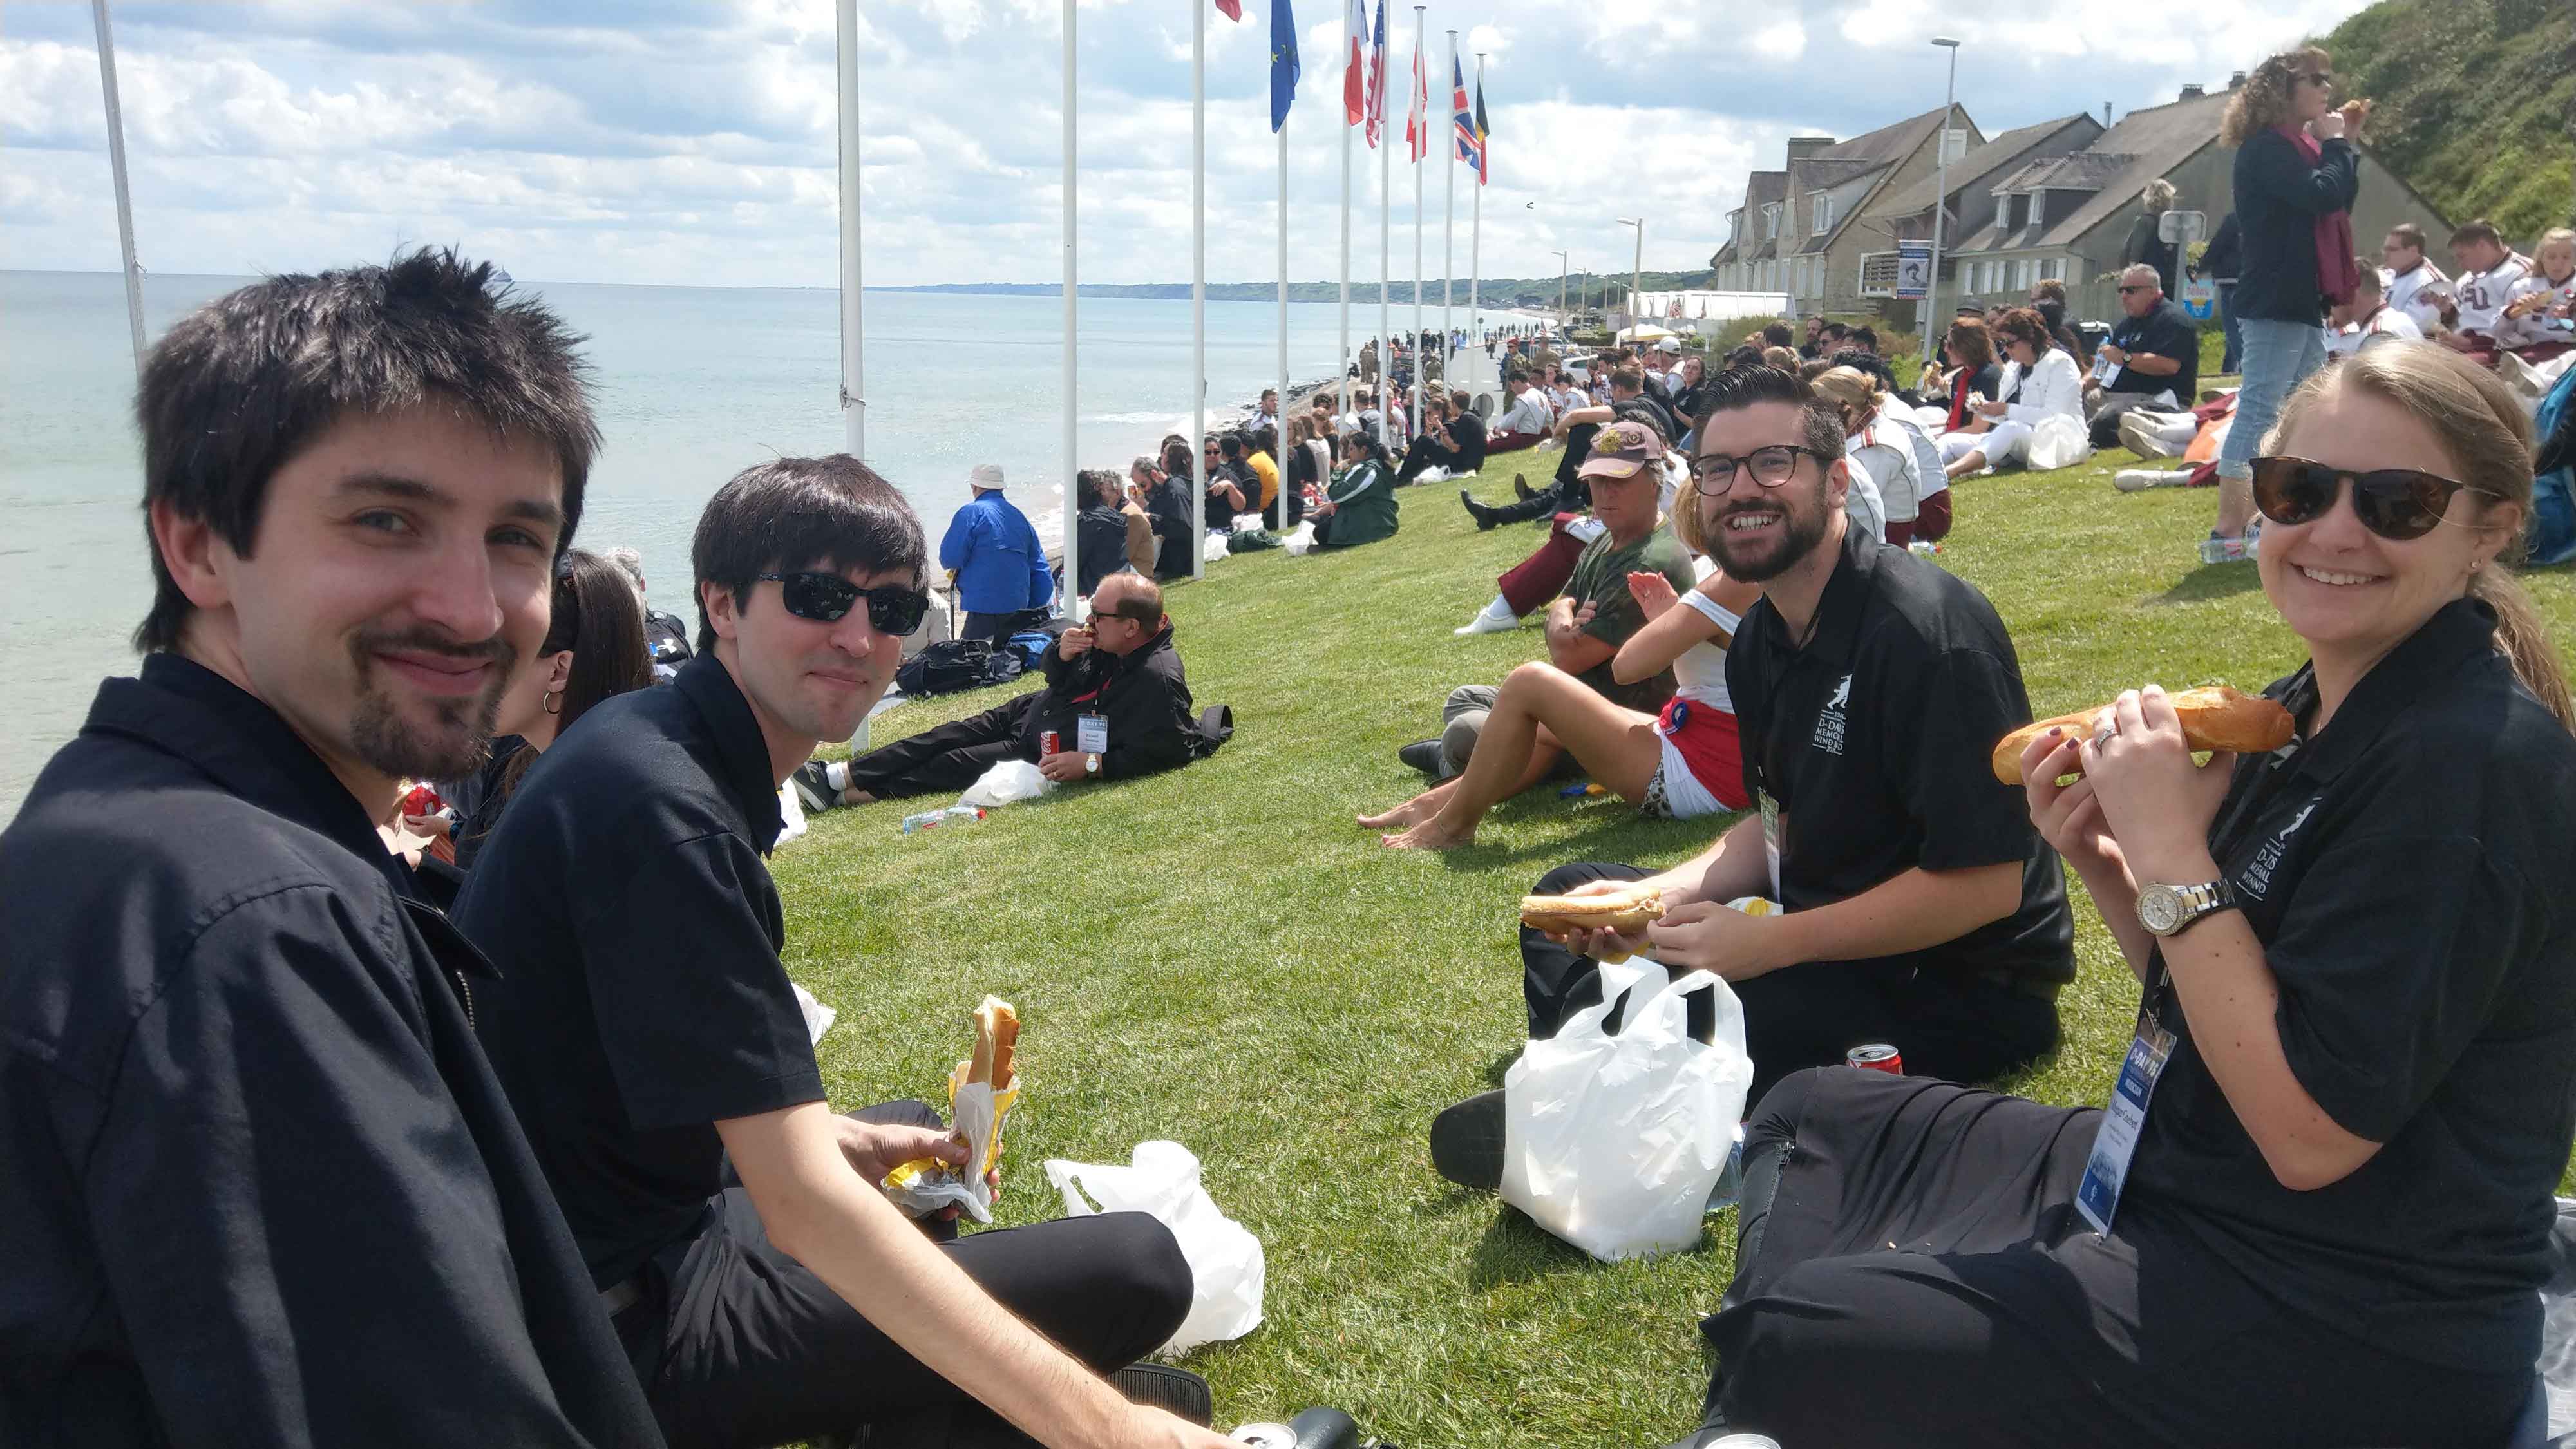  lunch at Omaha Beach ([pc: Jeff Held)
